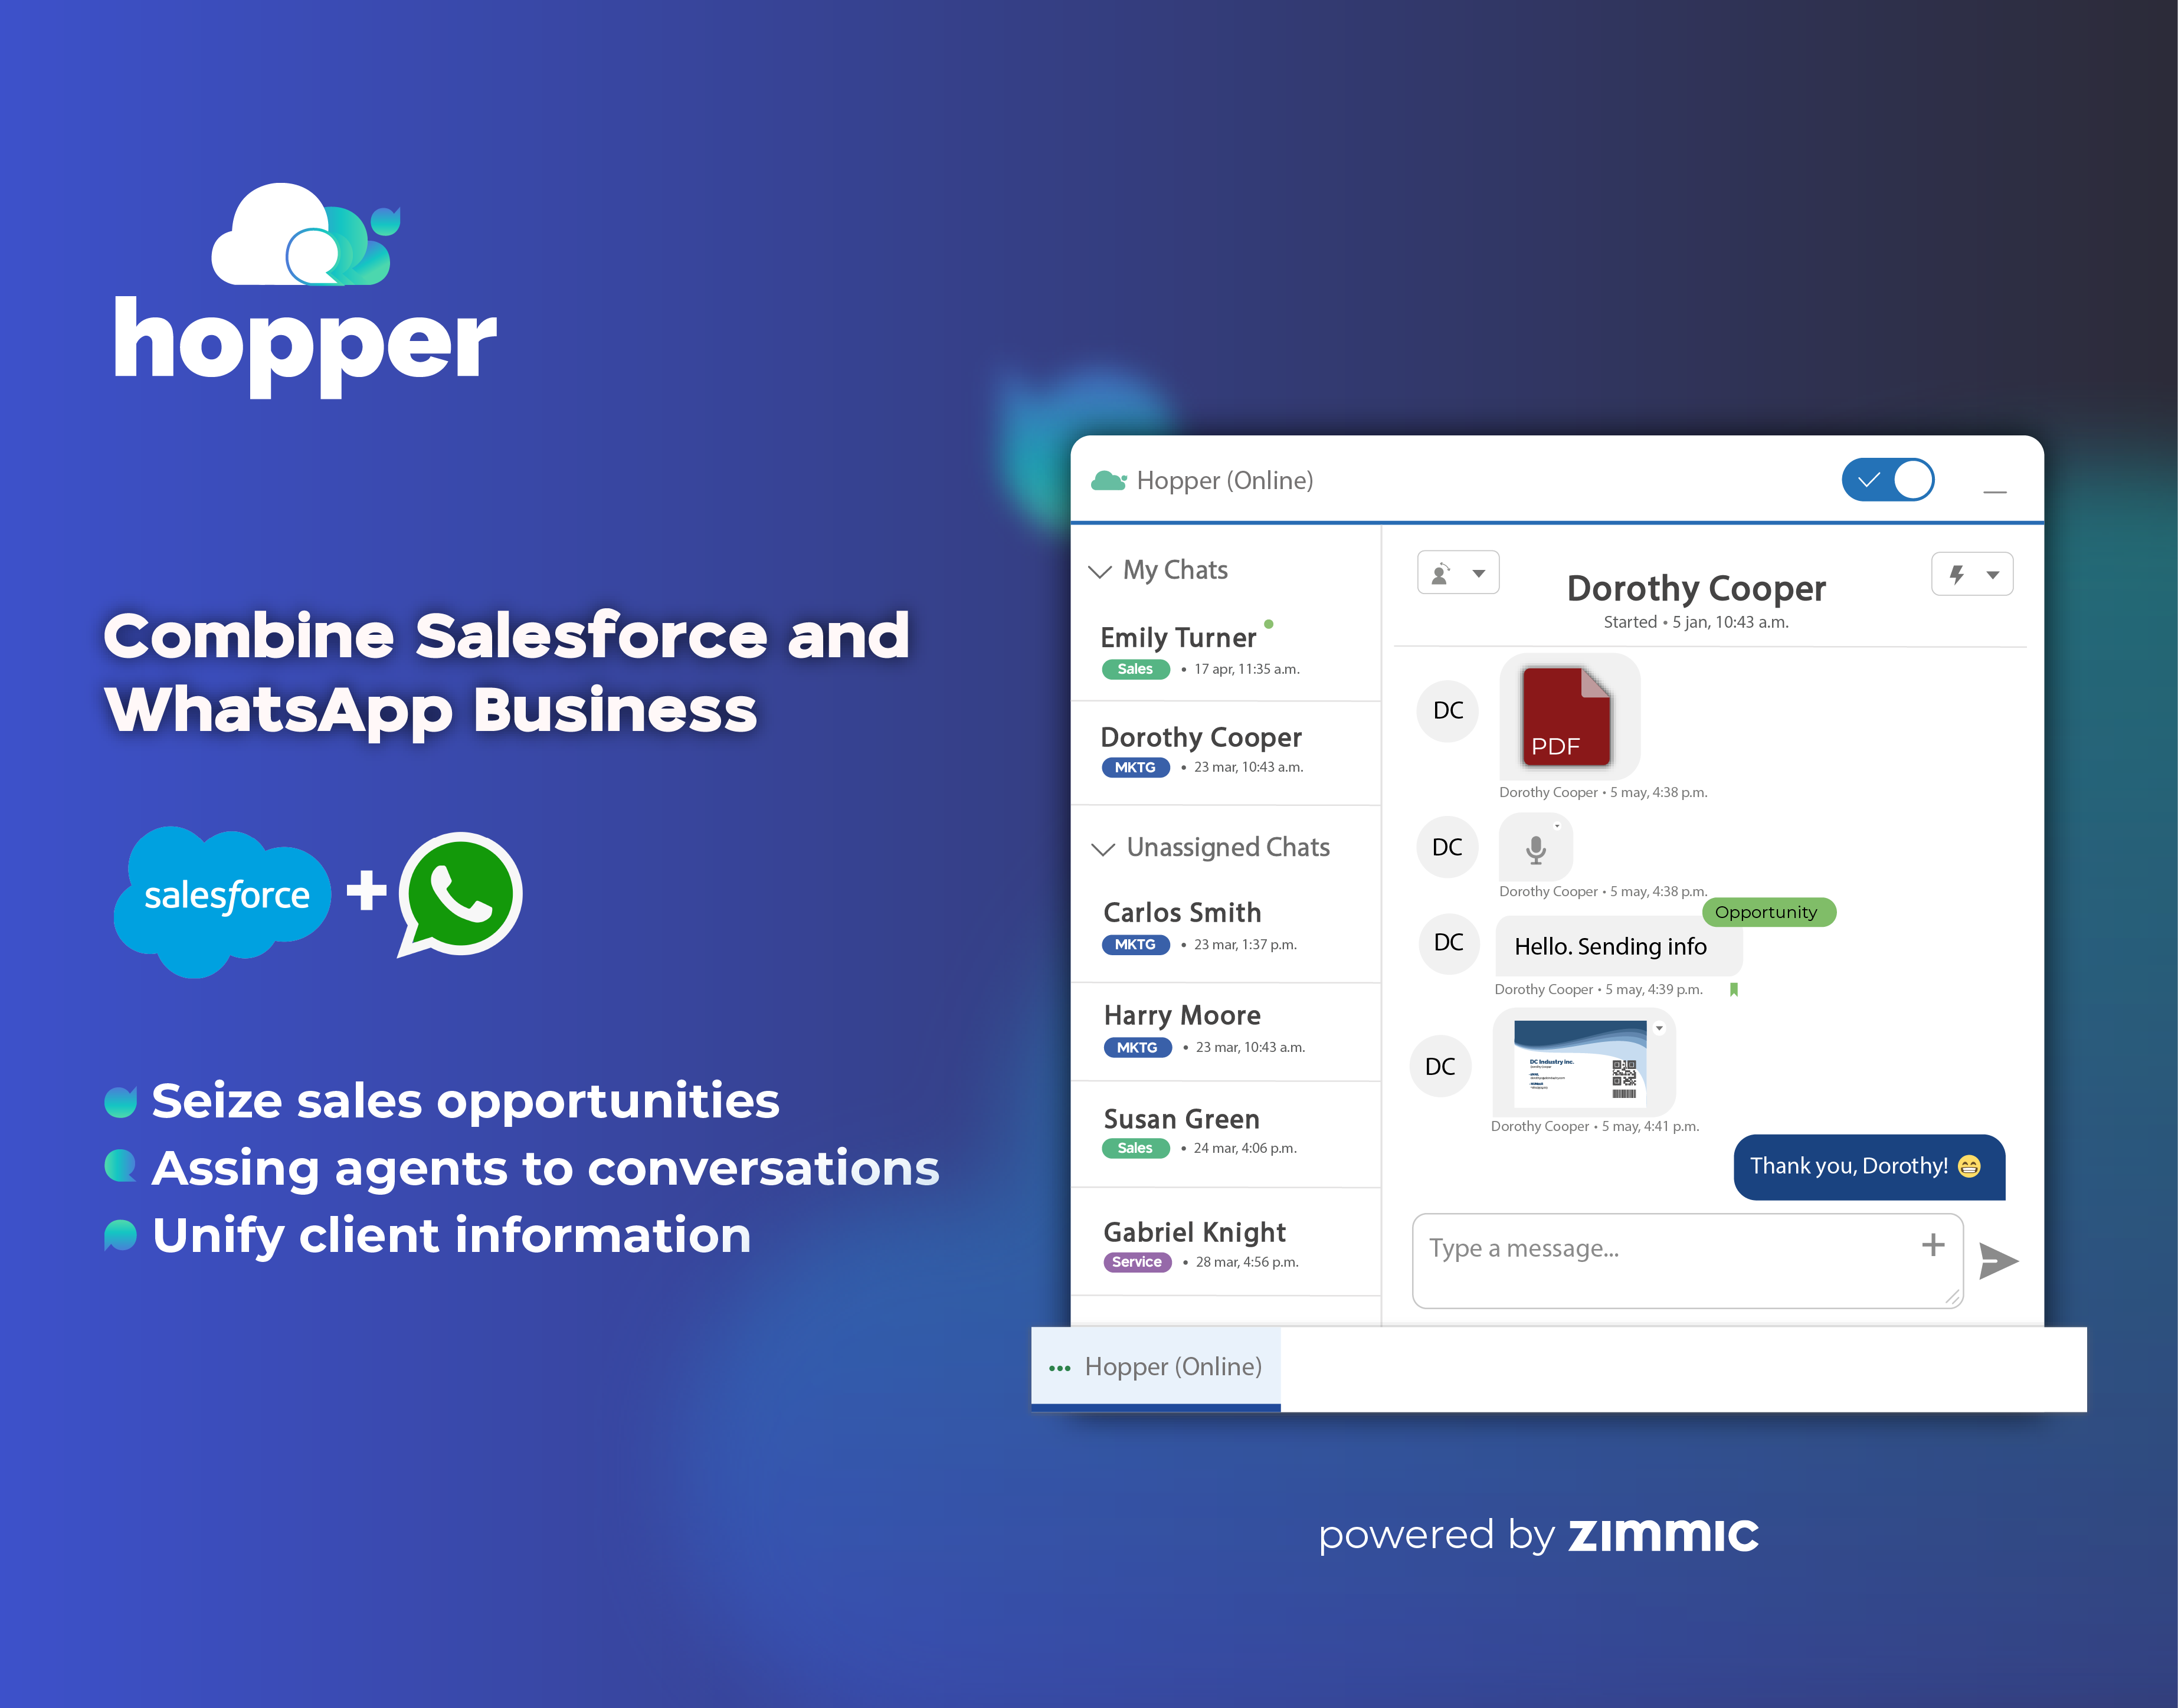 Using Hopper, you can receive images, videos, audio files, PDFs, etc through WhatsApp without leaving your Salesforce Org.